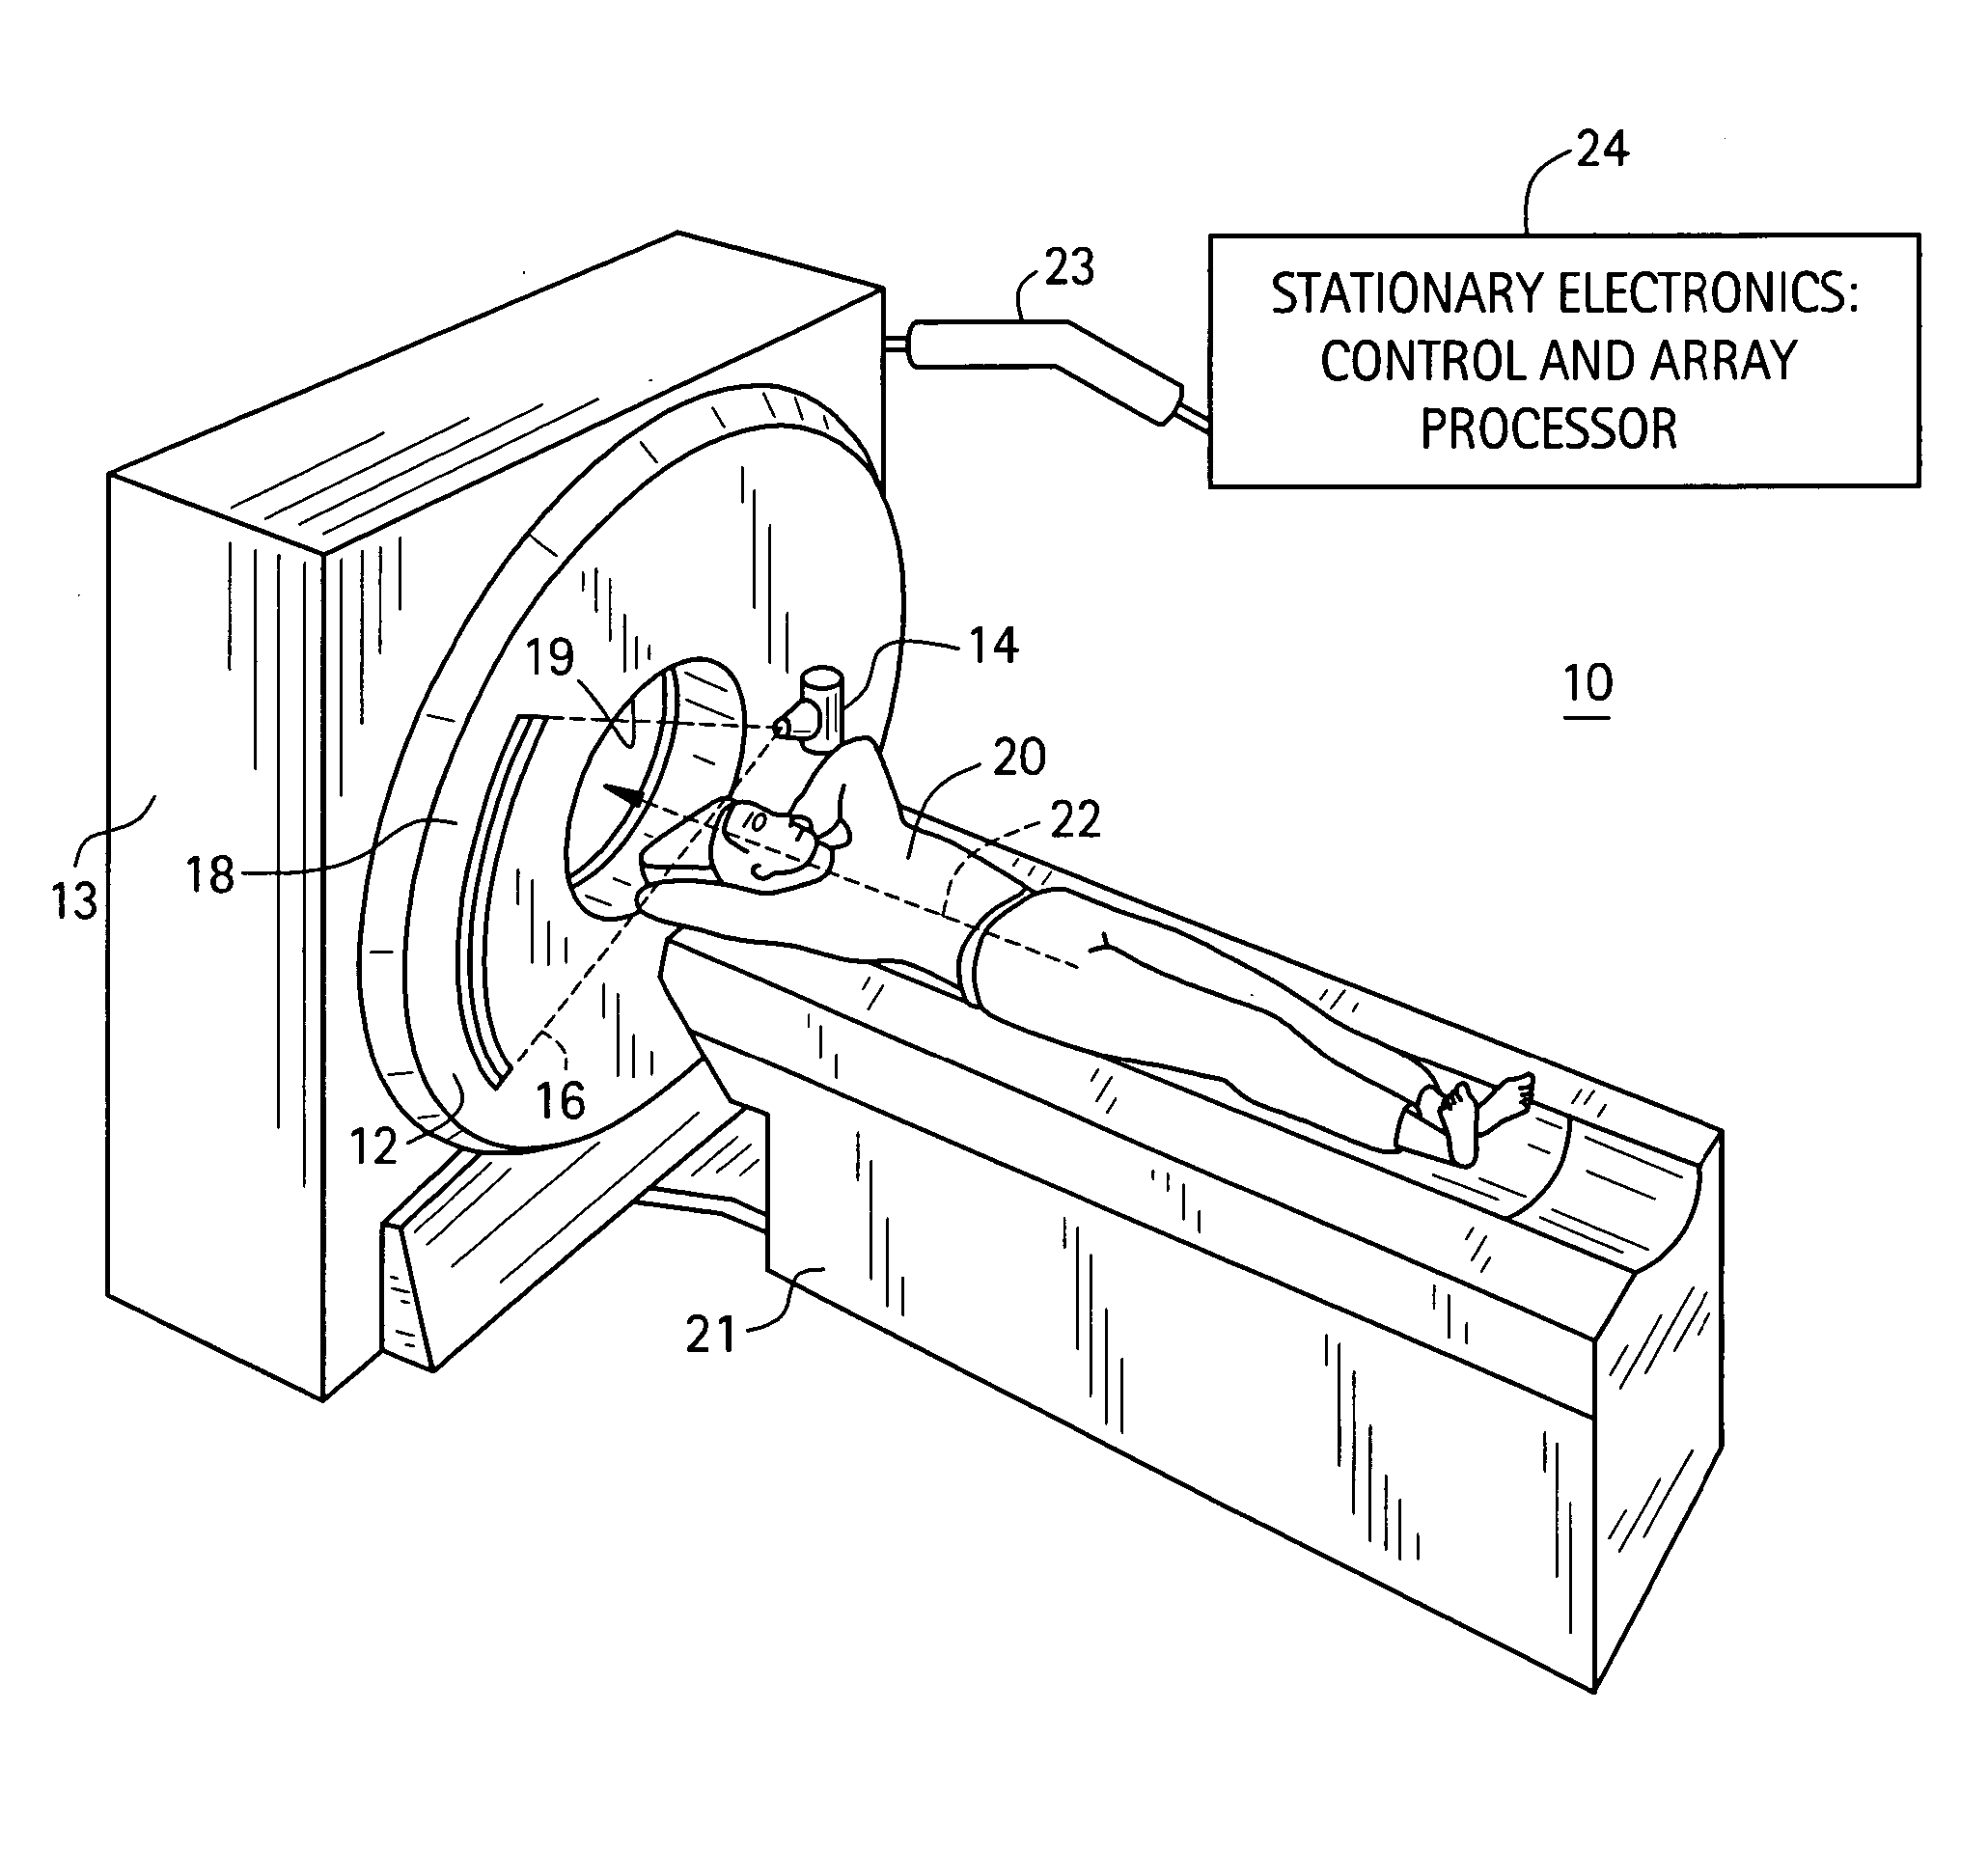 Multichannel contactless power transfer system for a computed tomography system